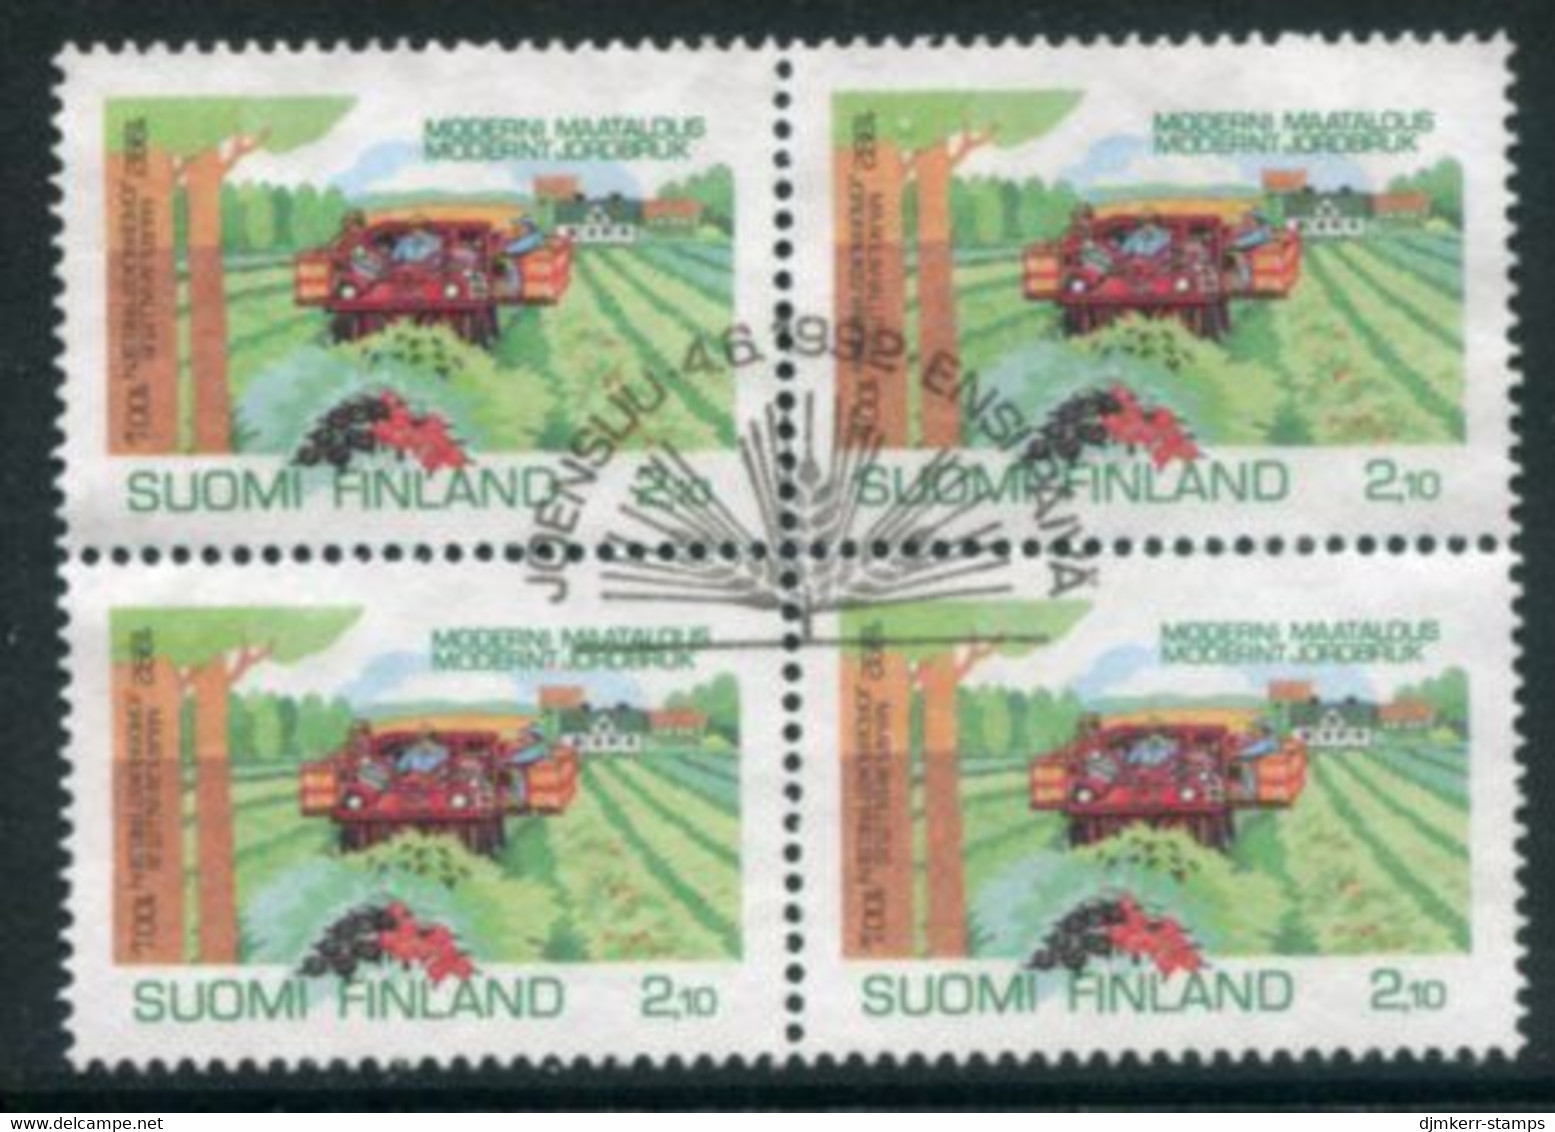 FINLAND 1992 Centenary Of Agriculture Ministry Block Of 4 Used.  Michel 1180 - Usados